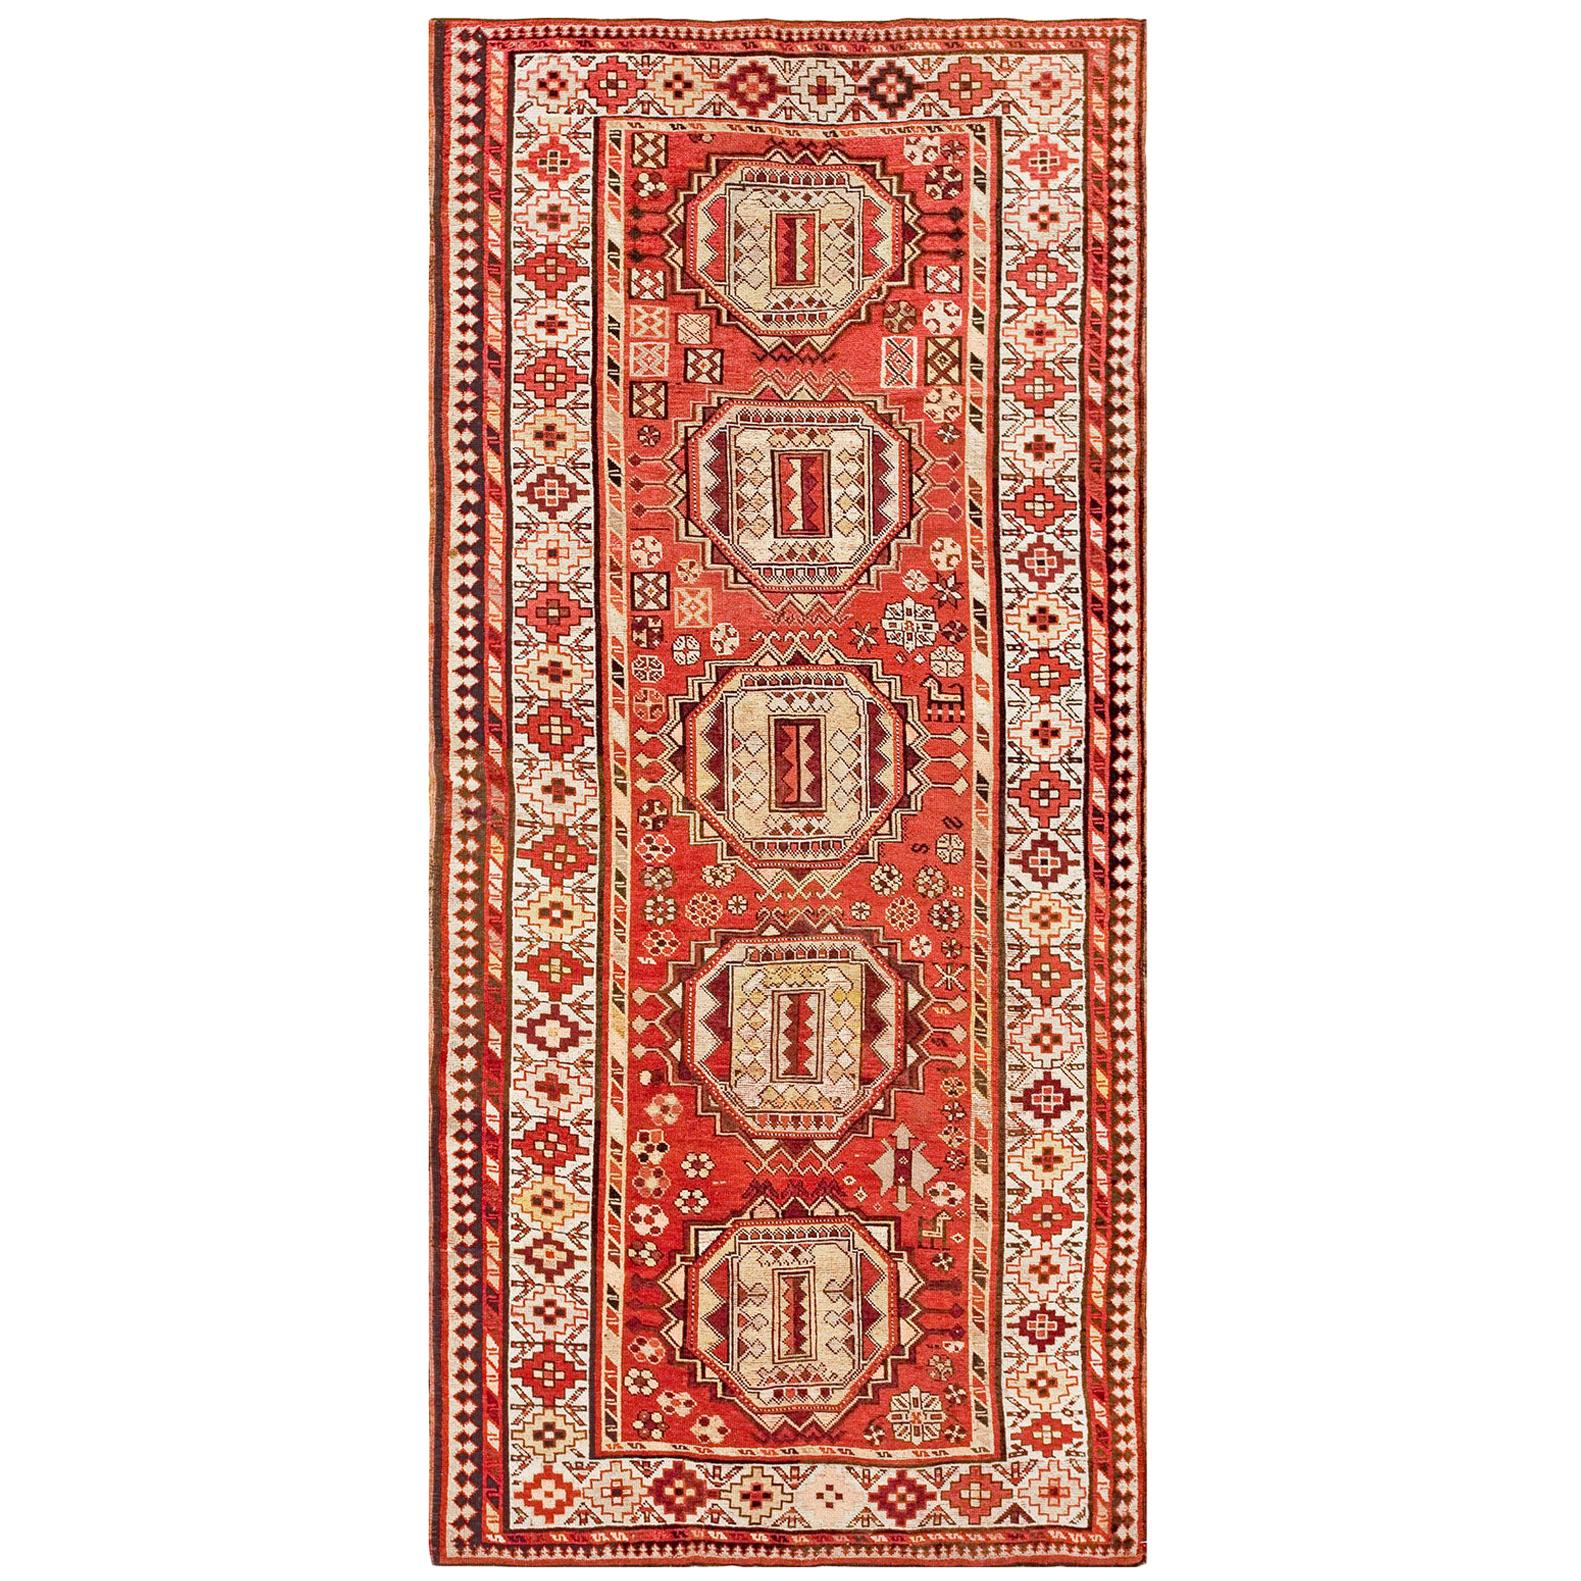 Early 20th Century Caucasian Karabagh Carpet ( 4' x 9' - 122 x 274 ) For Sale